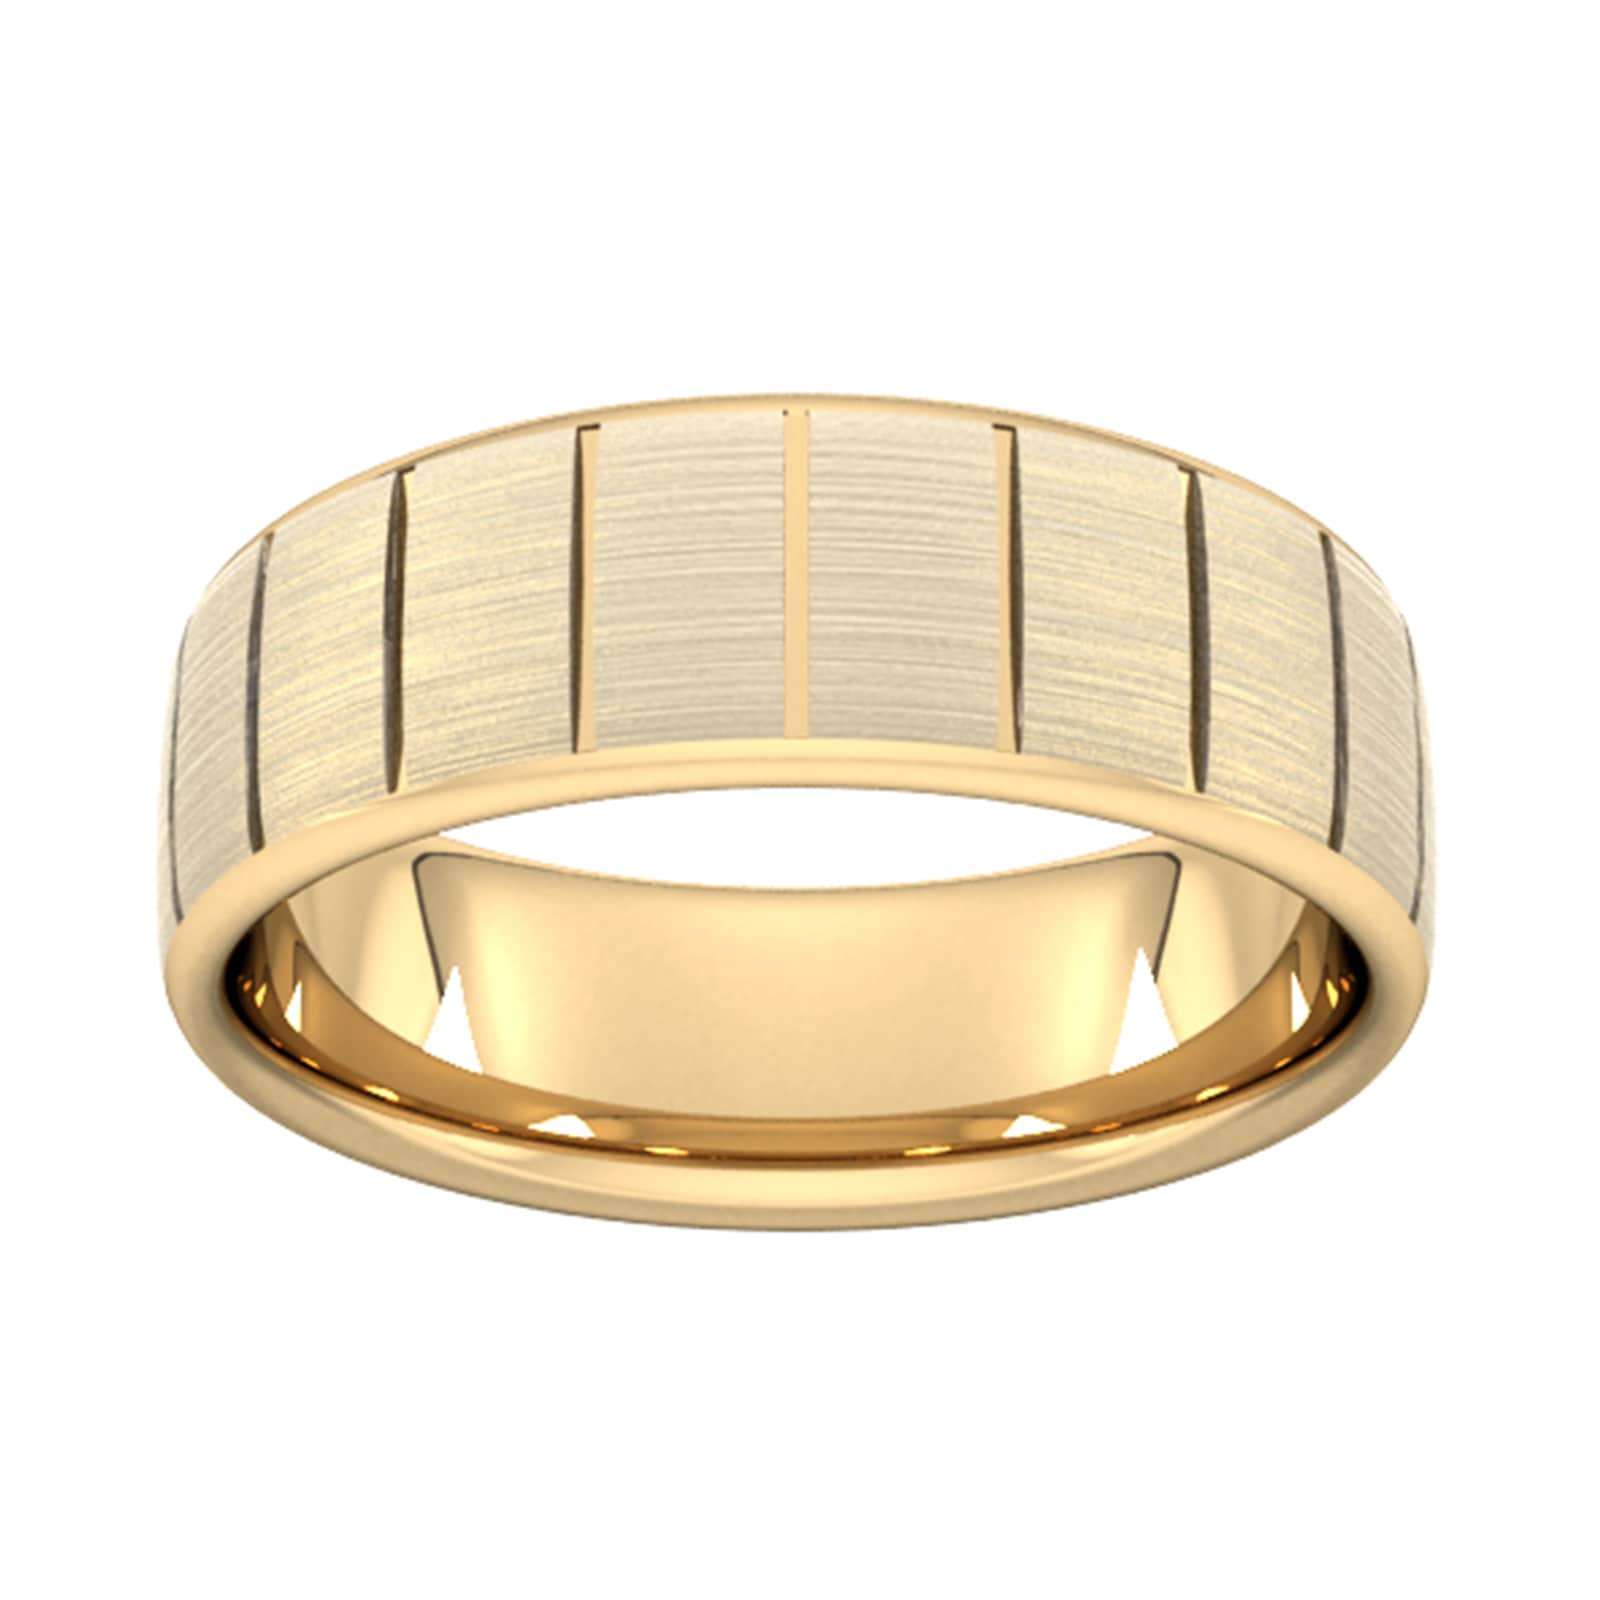 8mm D Shape Heavy Vertical Lines Wedding Ring In 9 Carat Yellow Gold - Ring Size Z